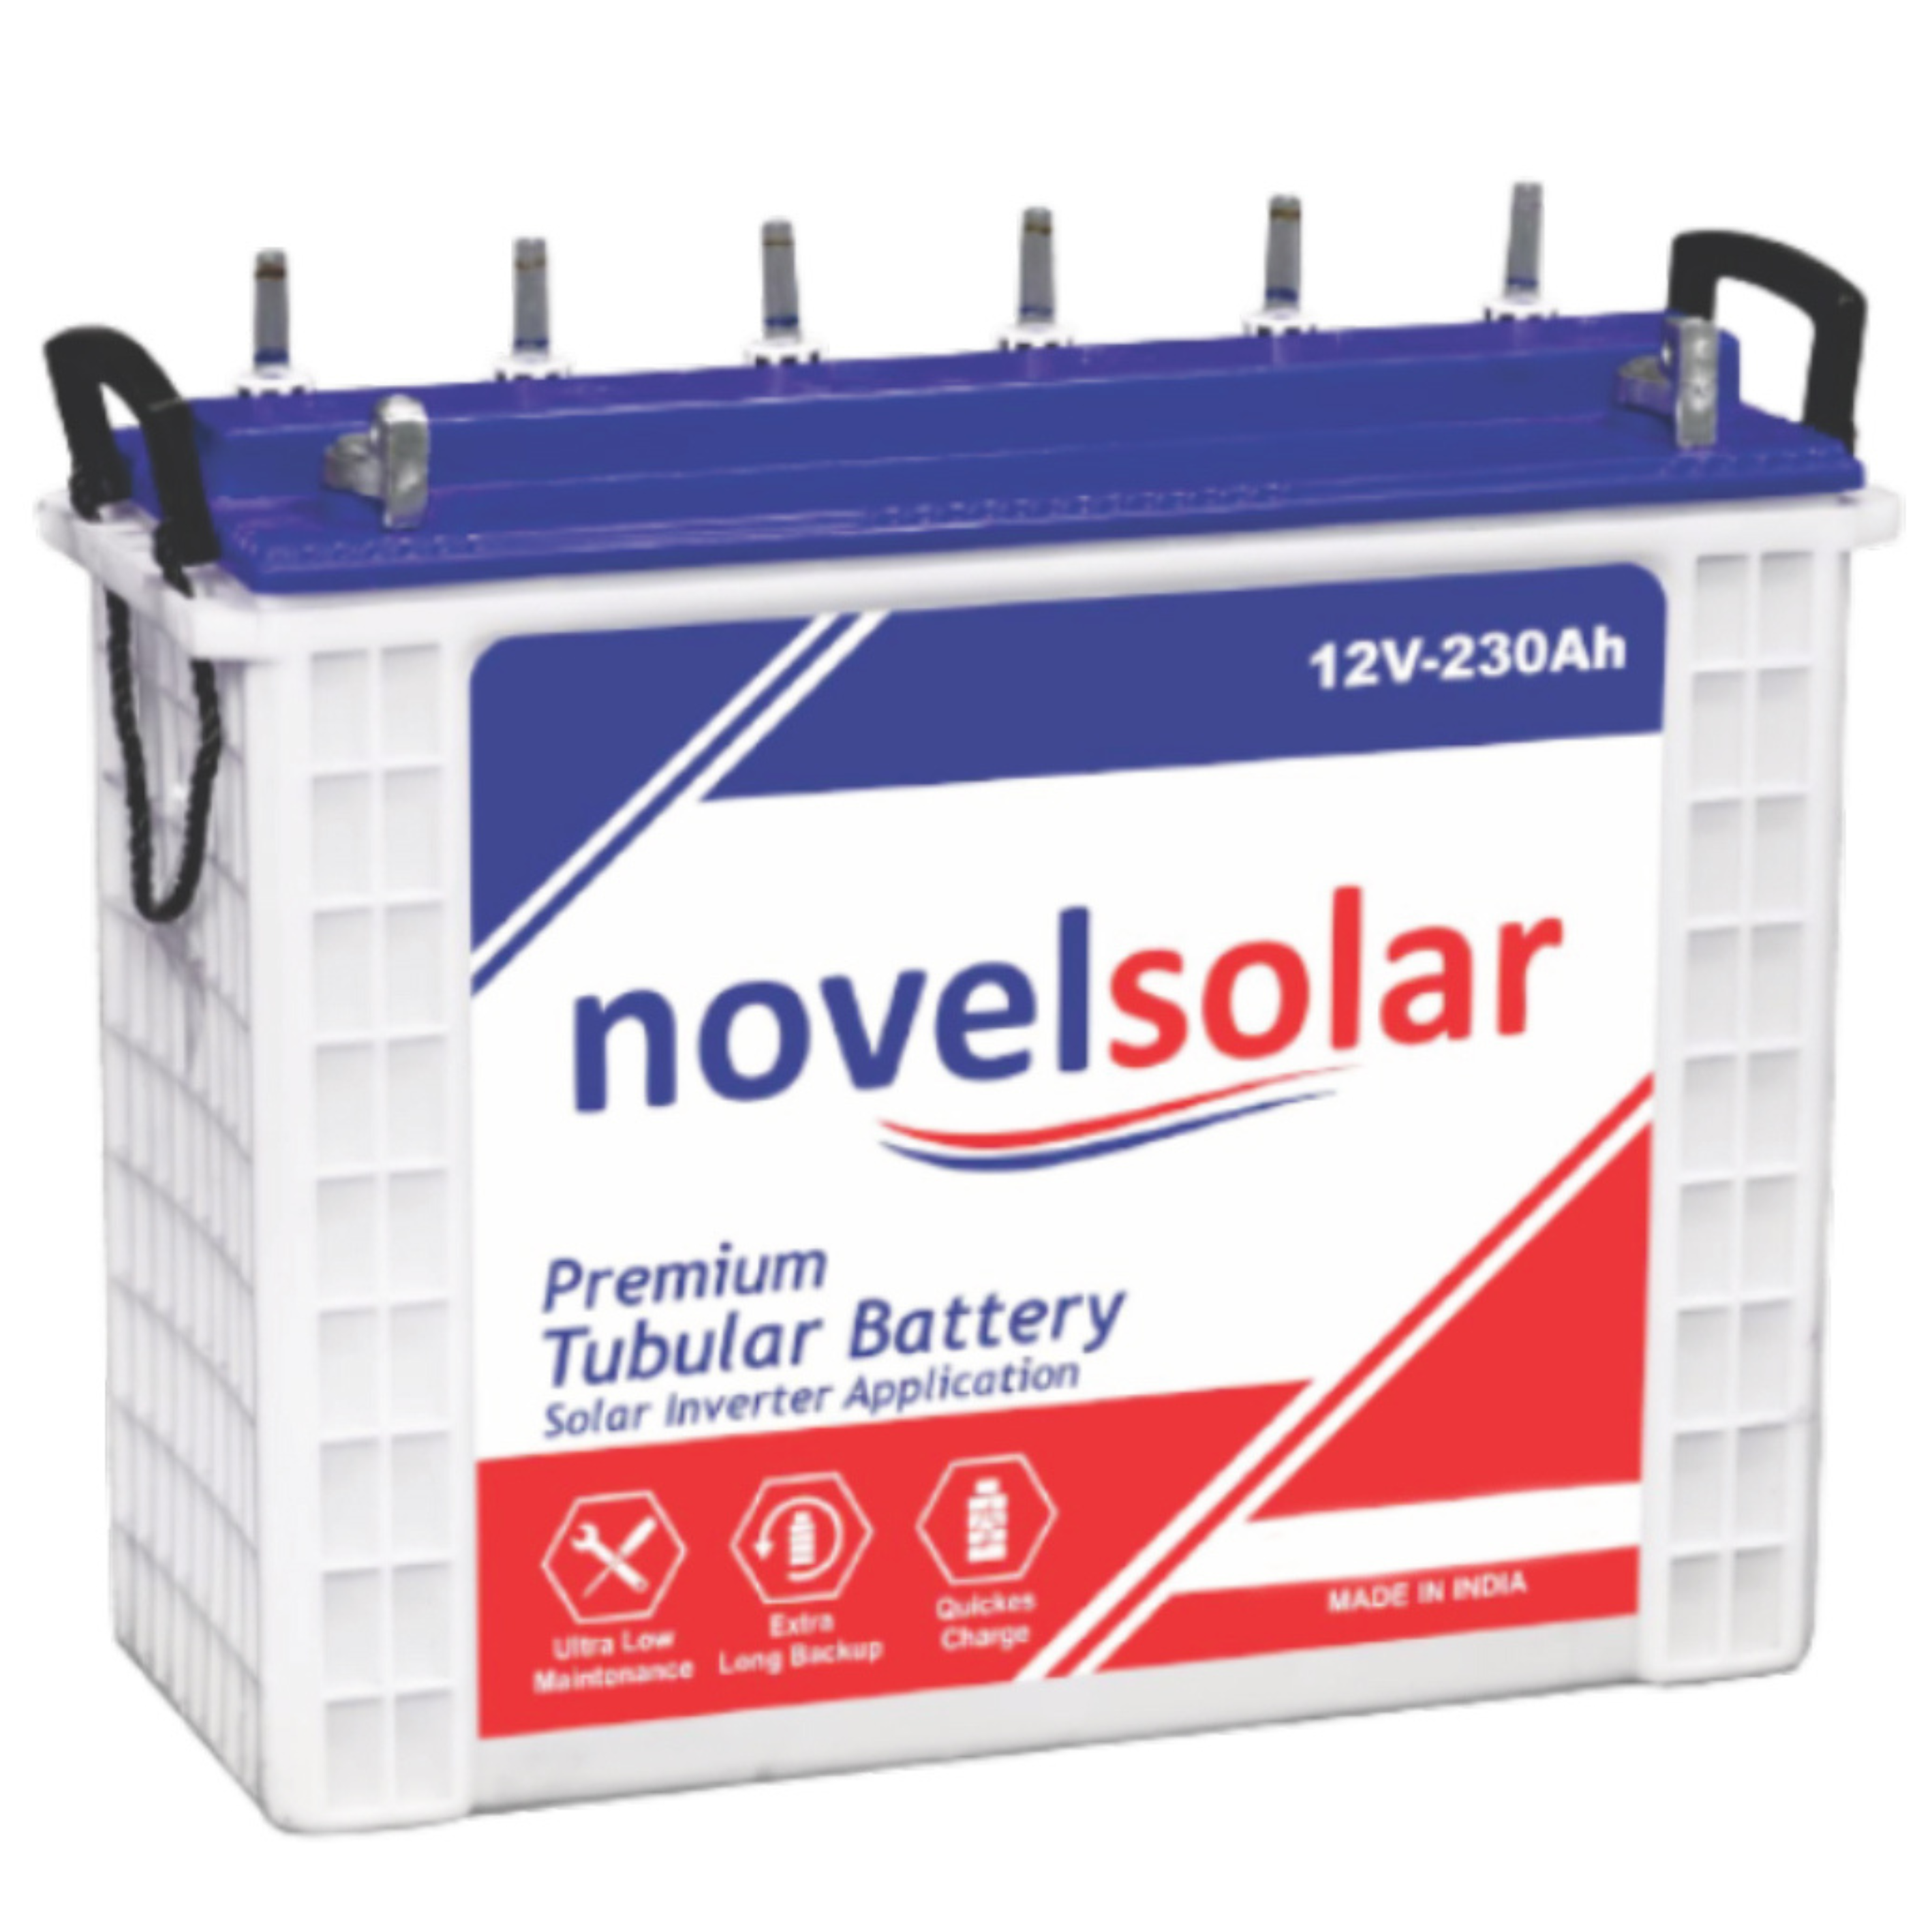 Solar battery system: The Skillful Player's Guide